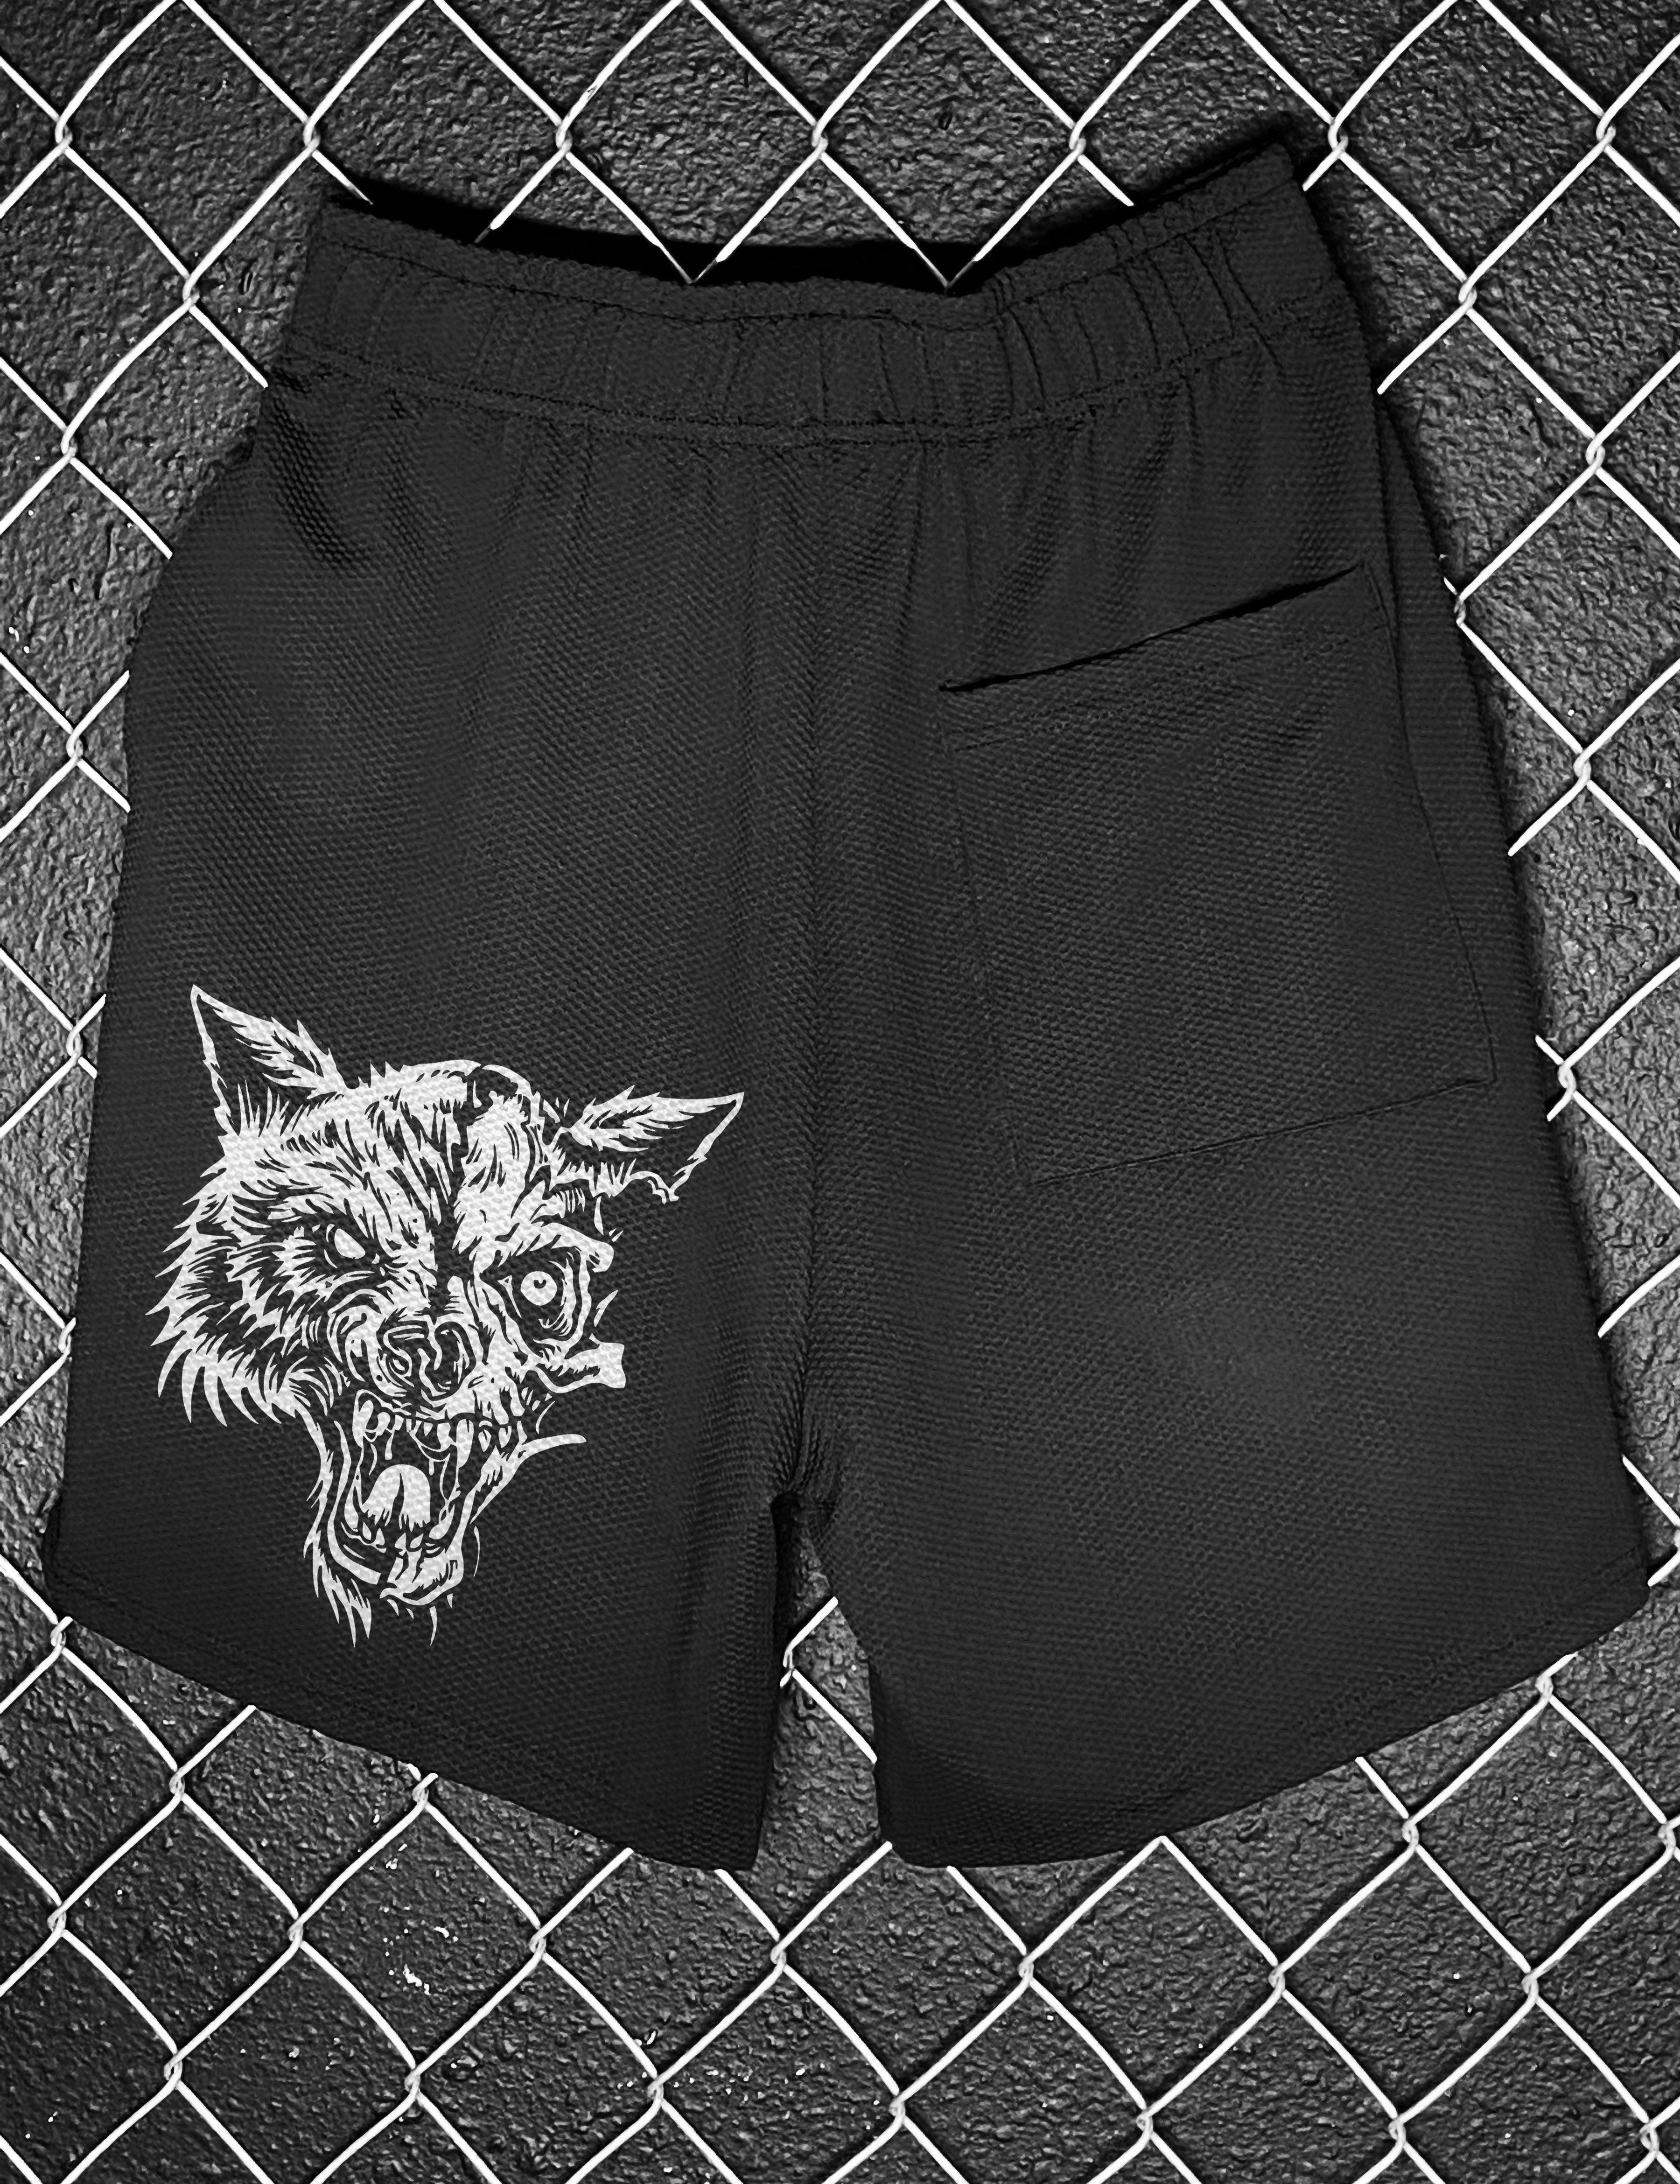 TDC LONE WOLF BASKETBALL SHORTS - The Drive Clothing